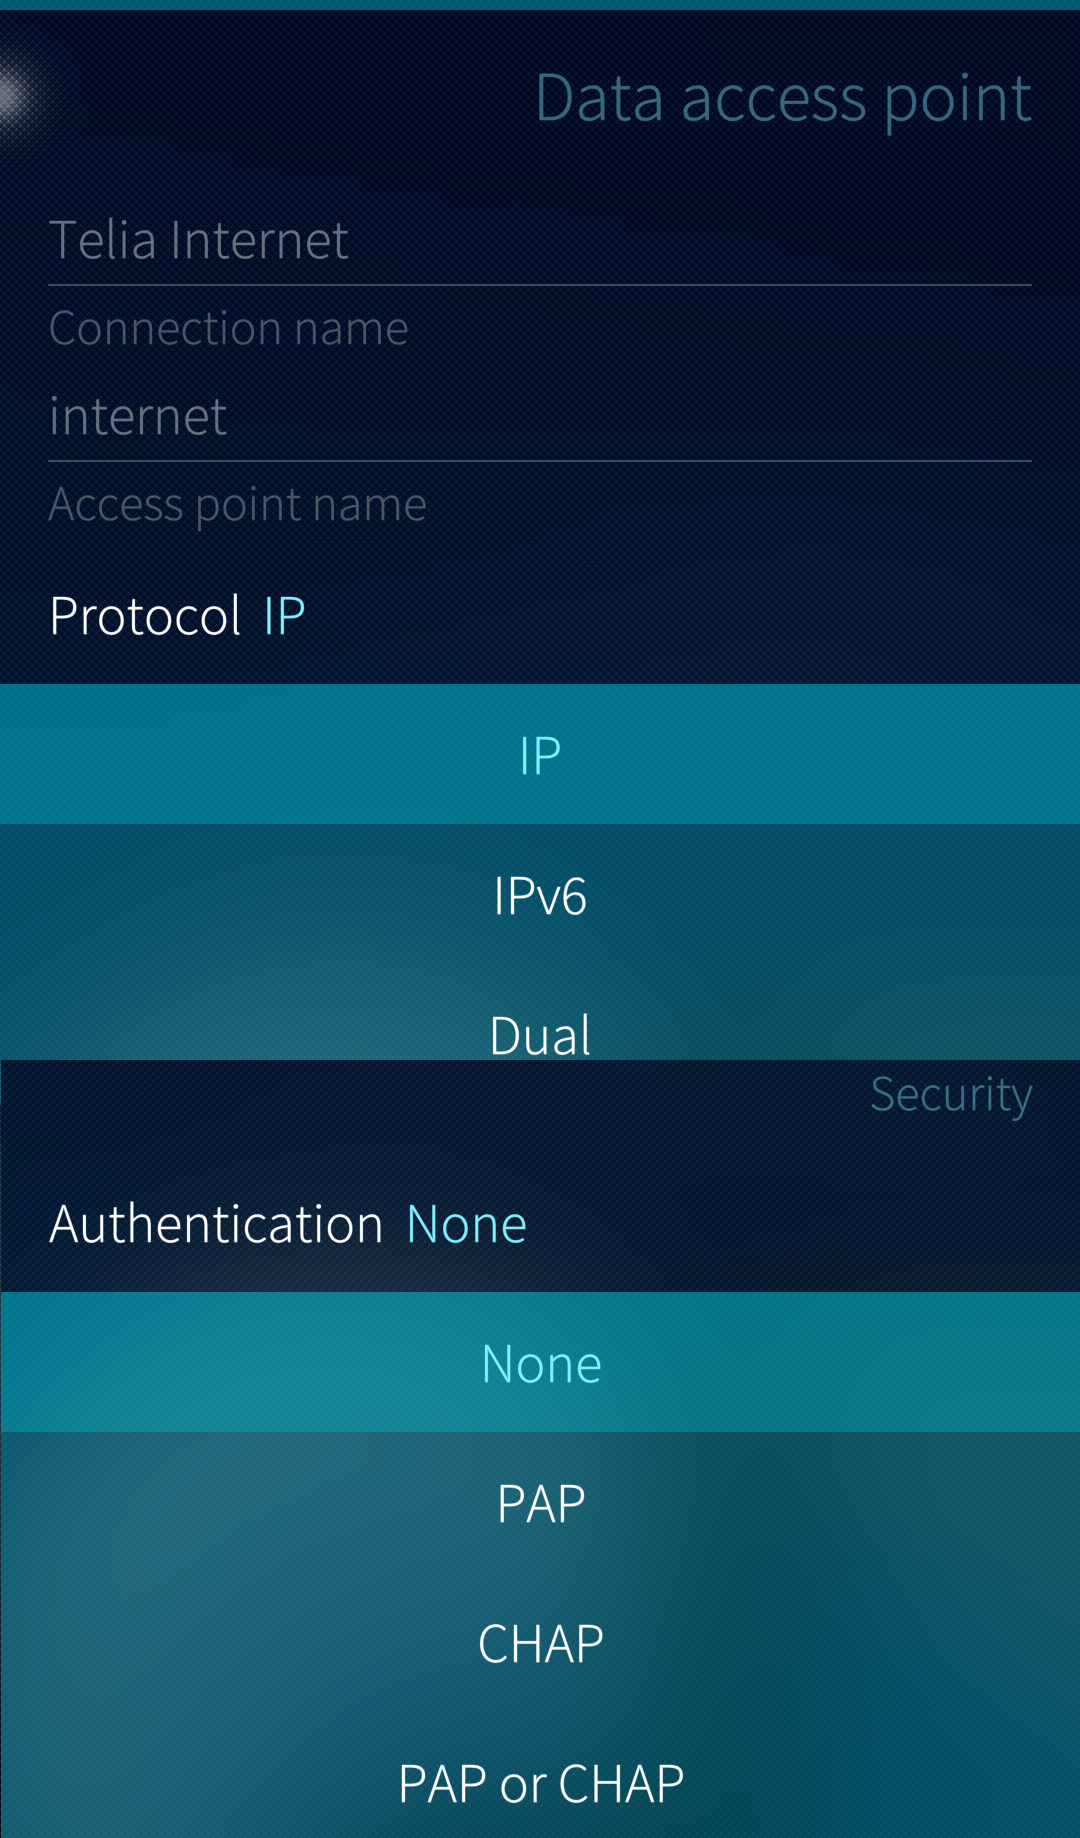 Data access point settings